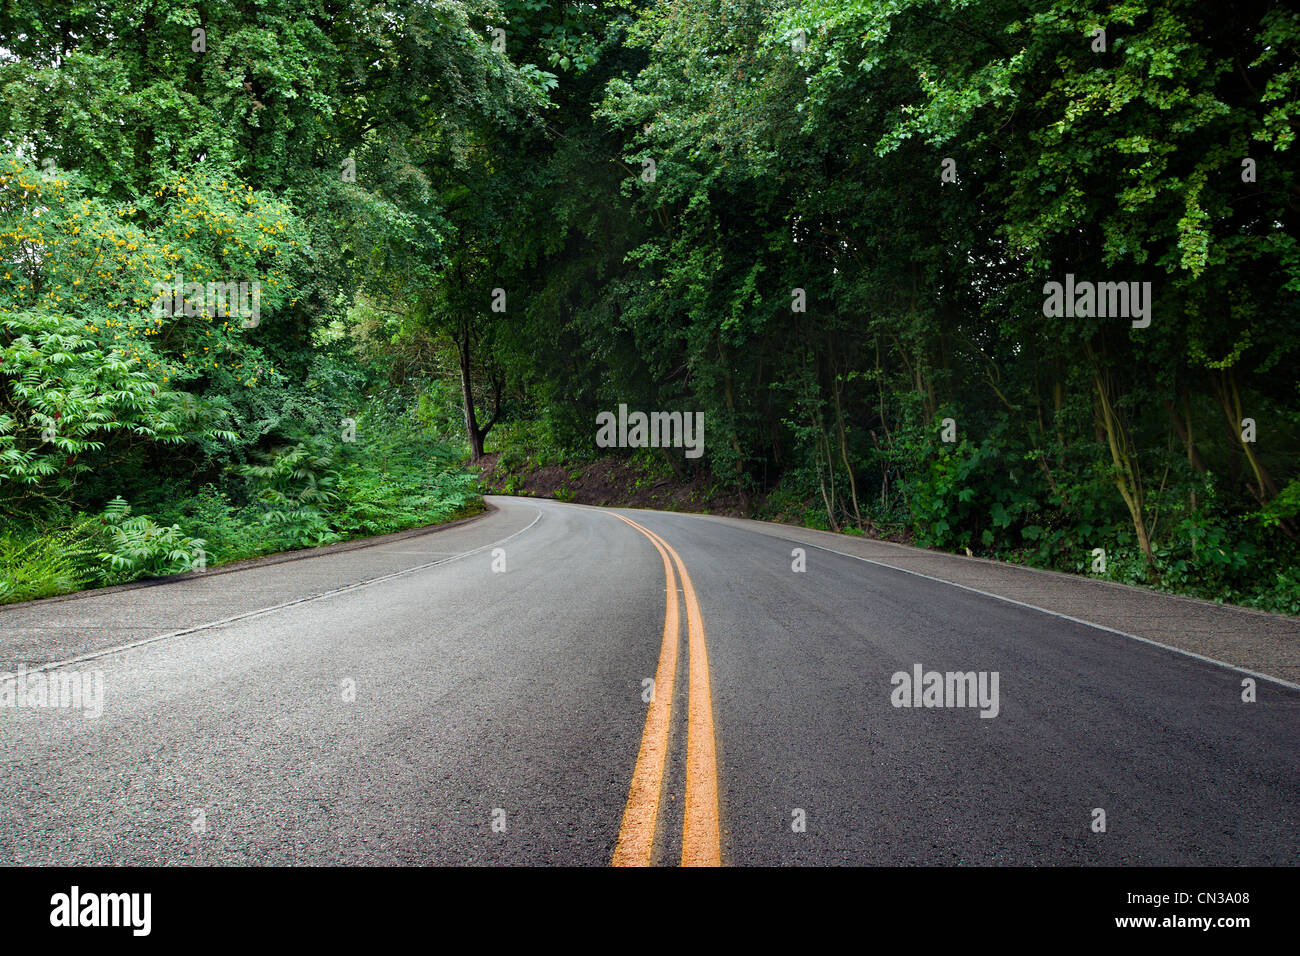 Curving road in forest Stock Photo